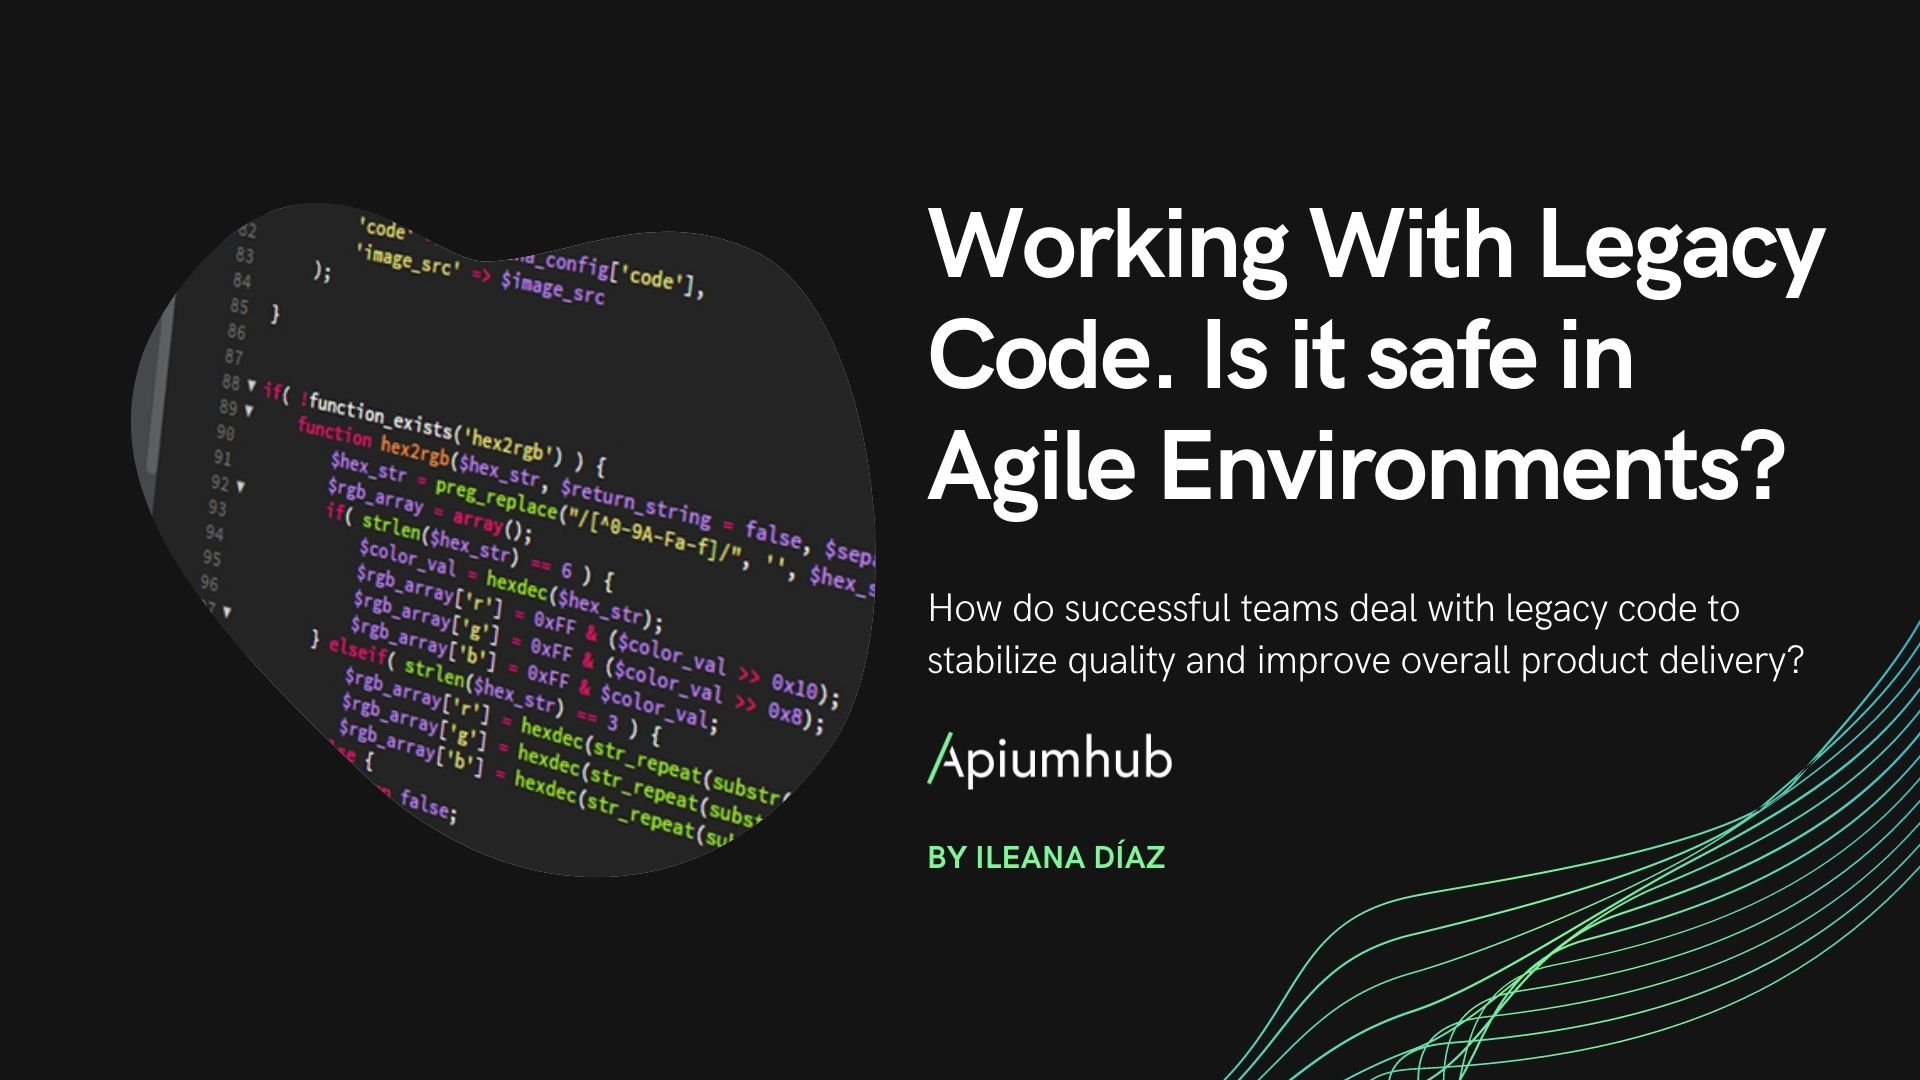 Working With Legacy Code. Is it safe in Agile Environments?